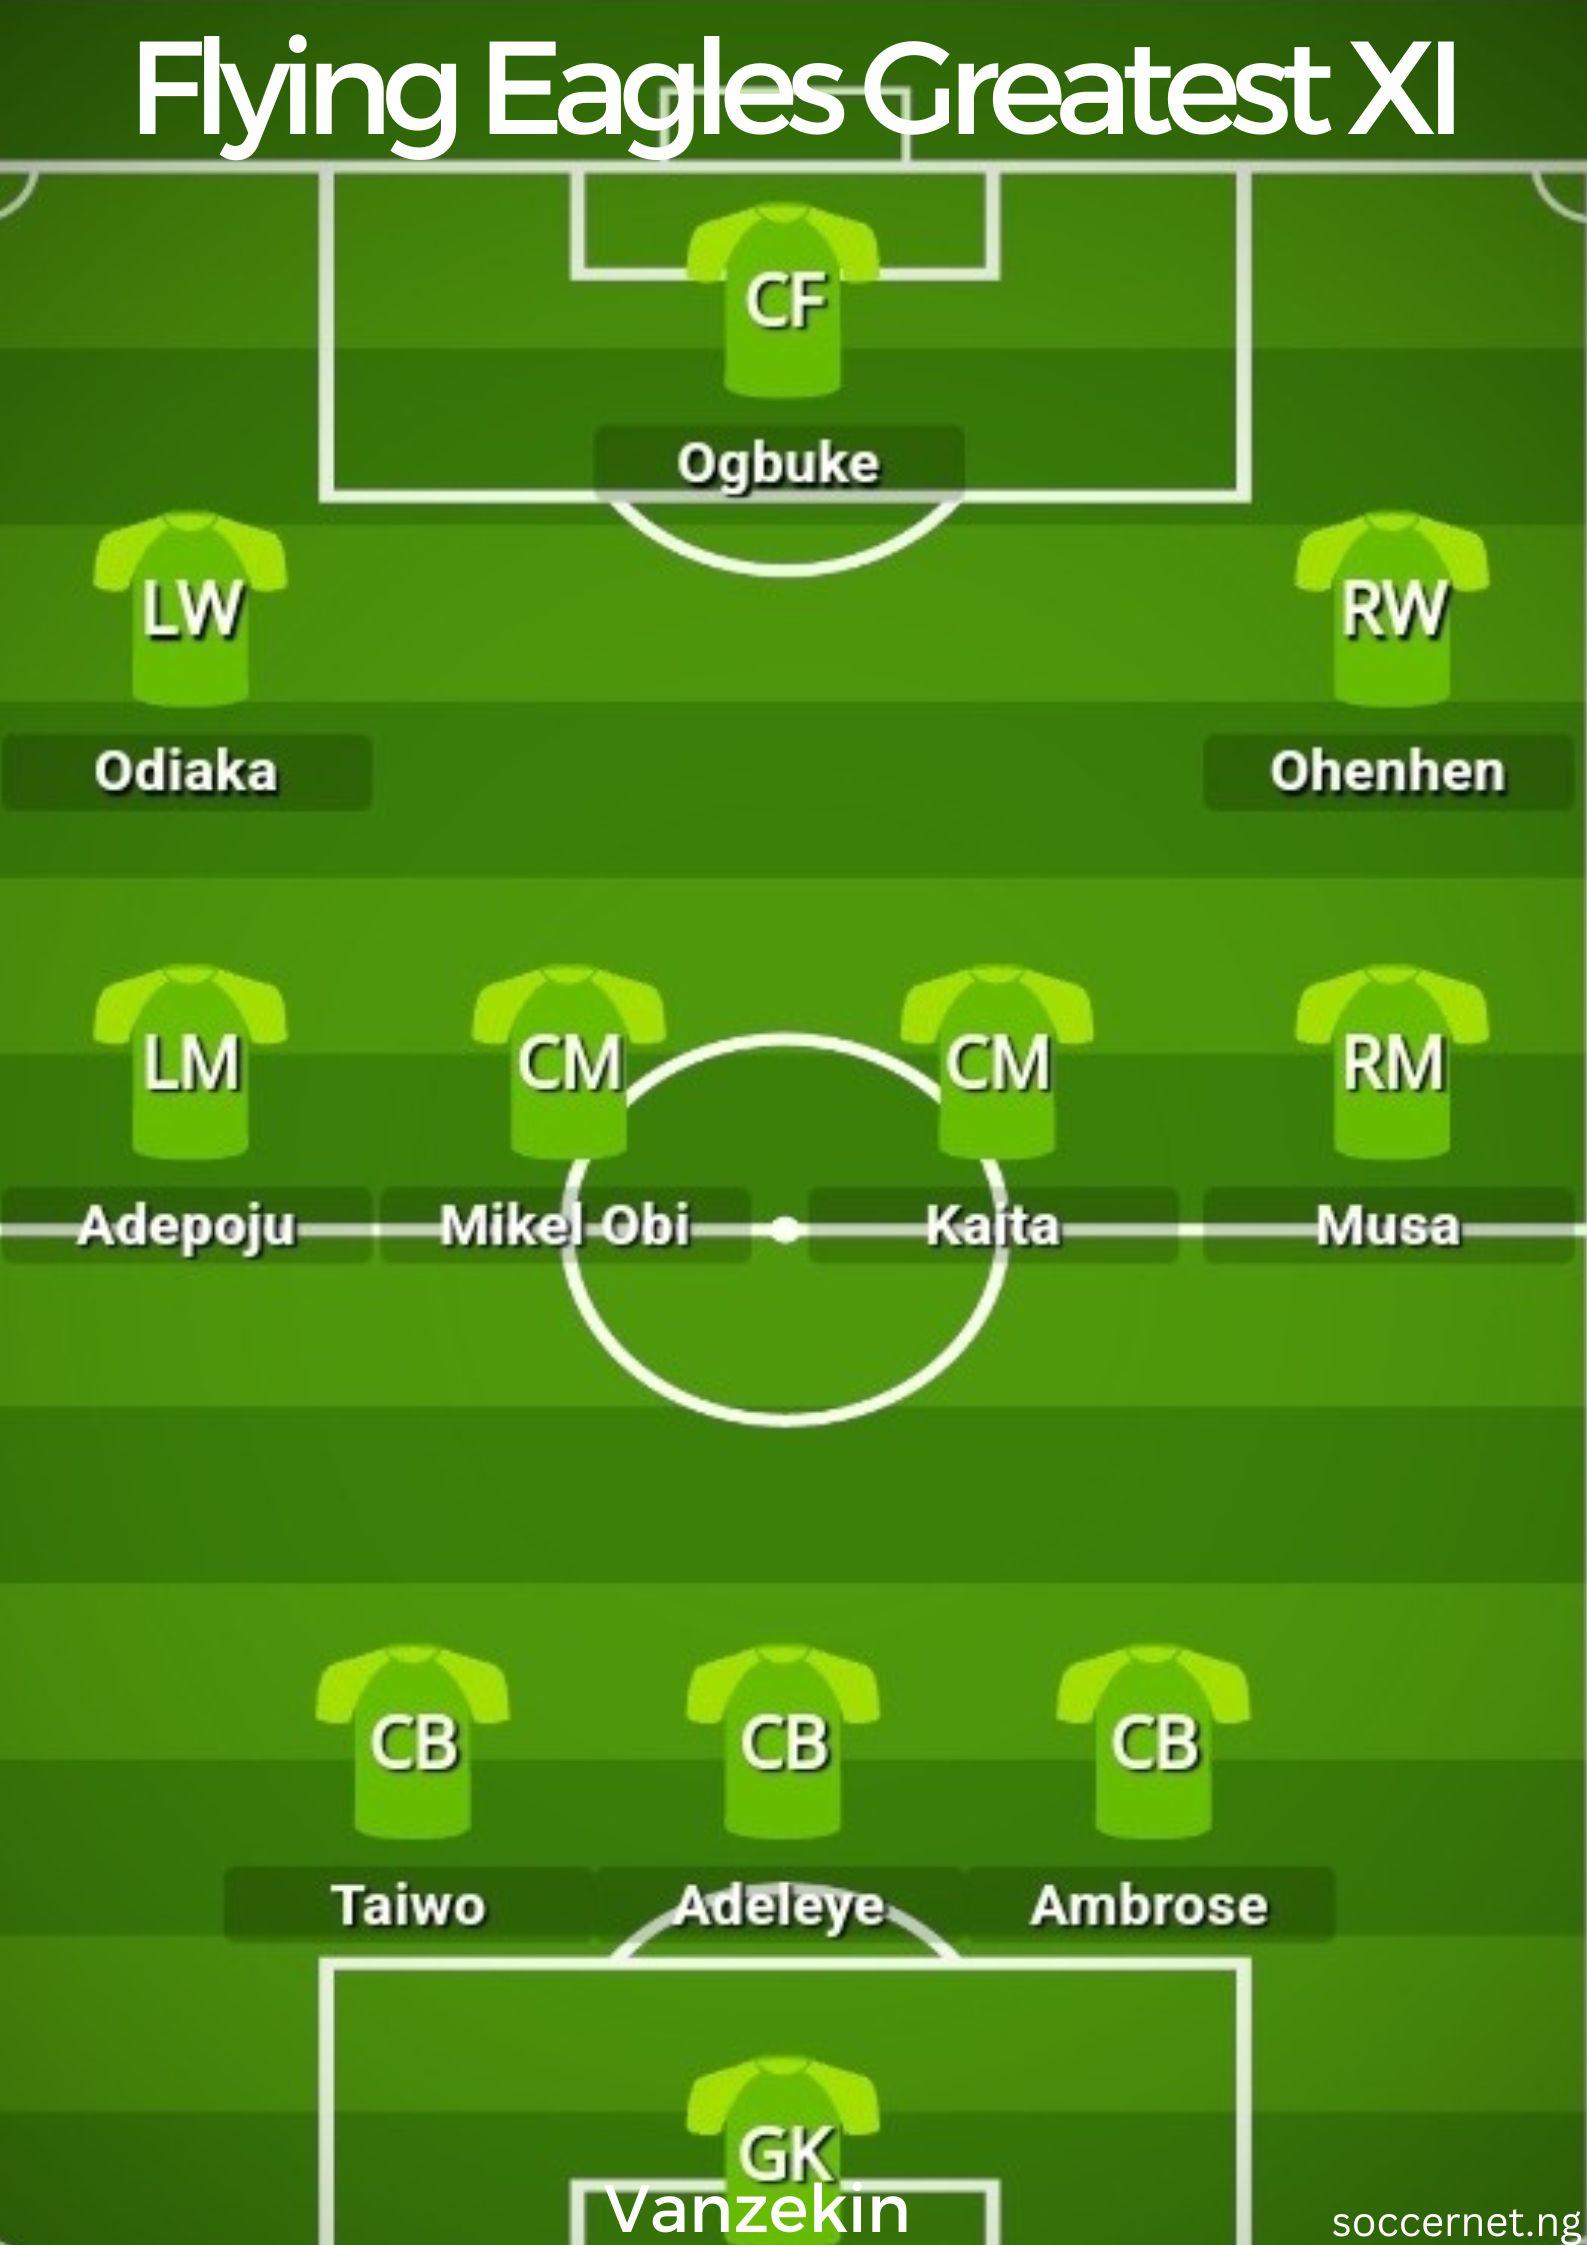 Flying Eagles Greatest World Cup XI